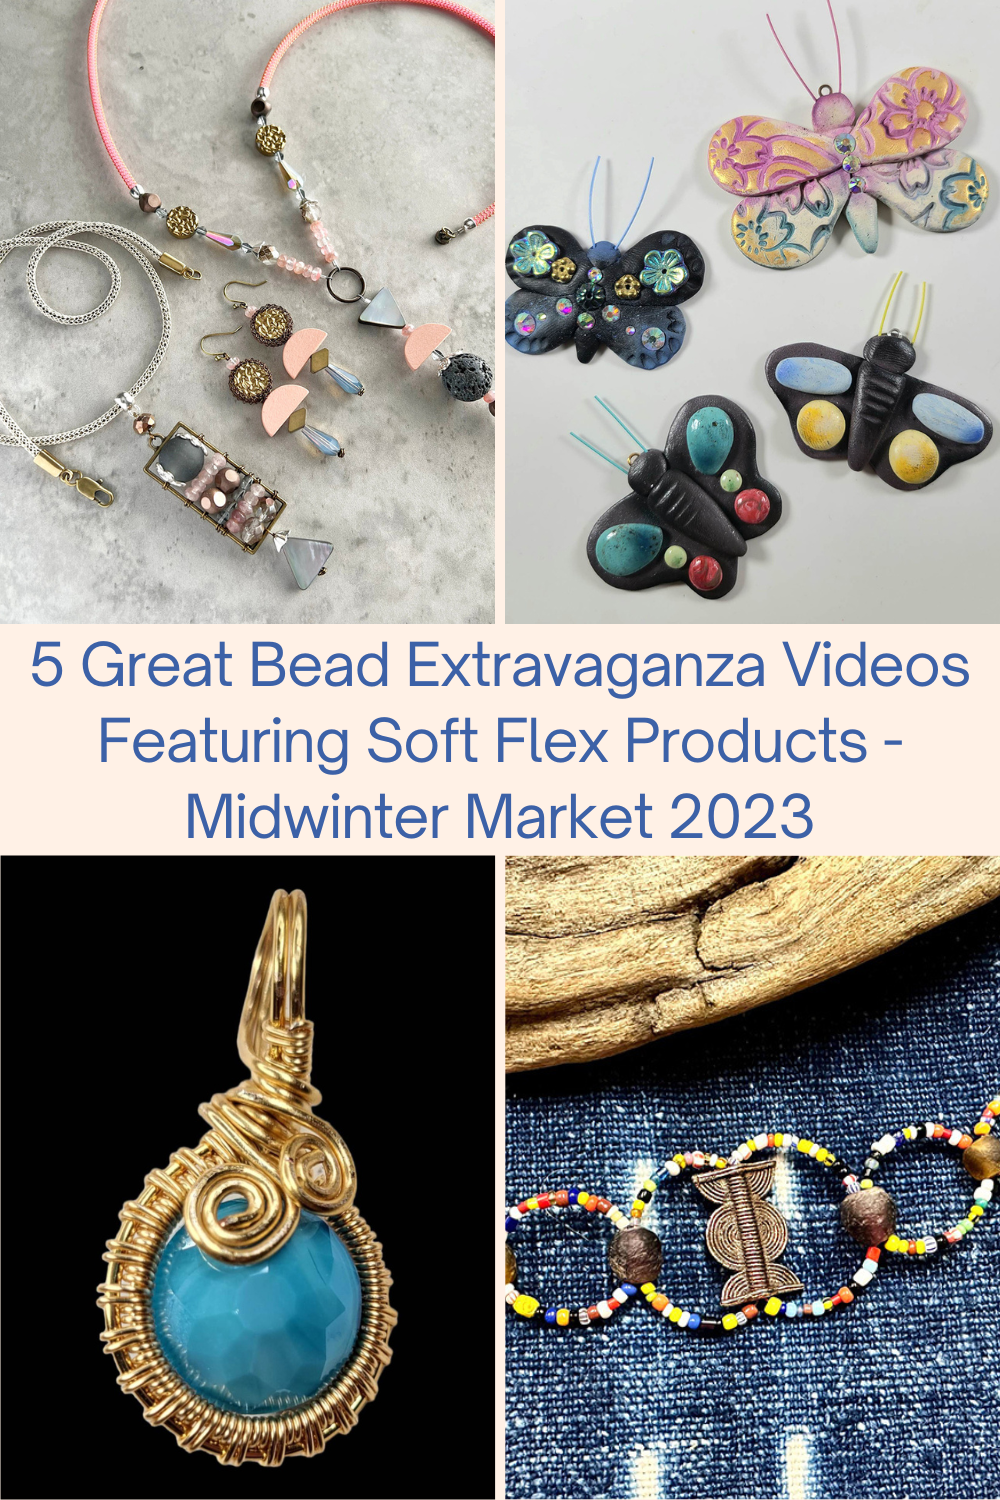 5 Great Bead Extravaganza Videos Featuring Soft Flex Products - Midwinter Market 2023 Collage